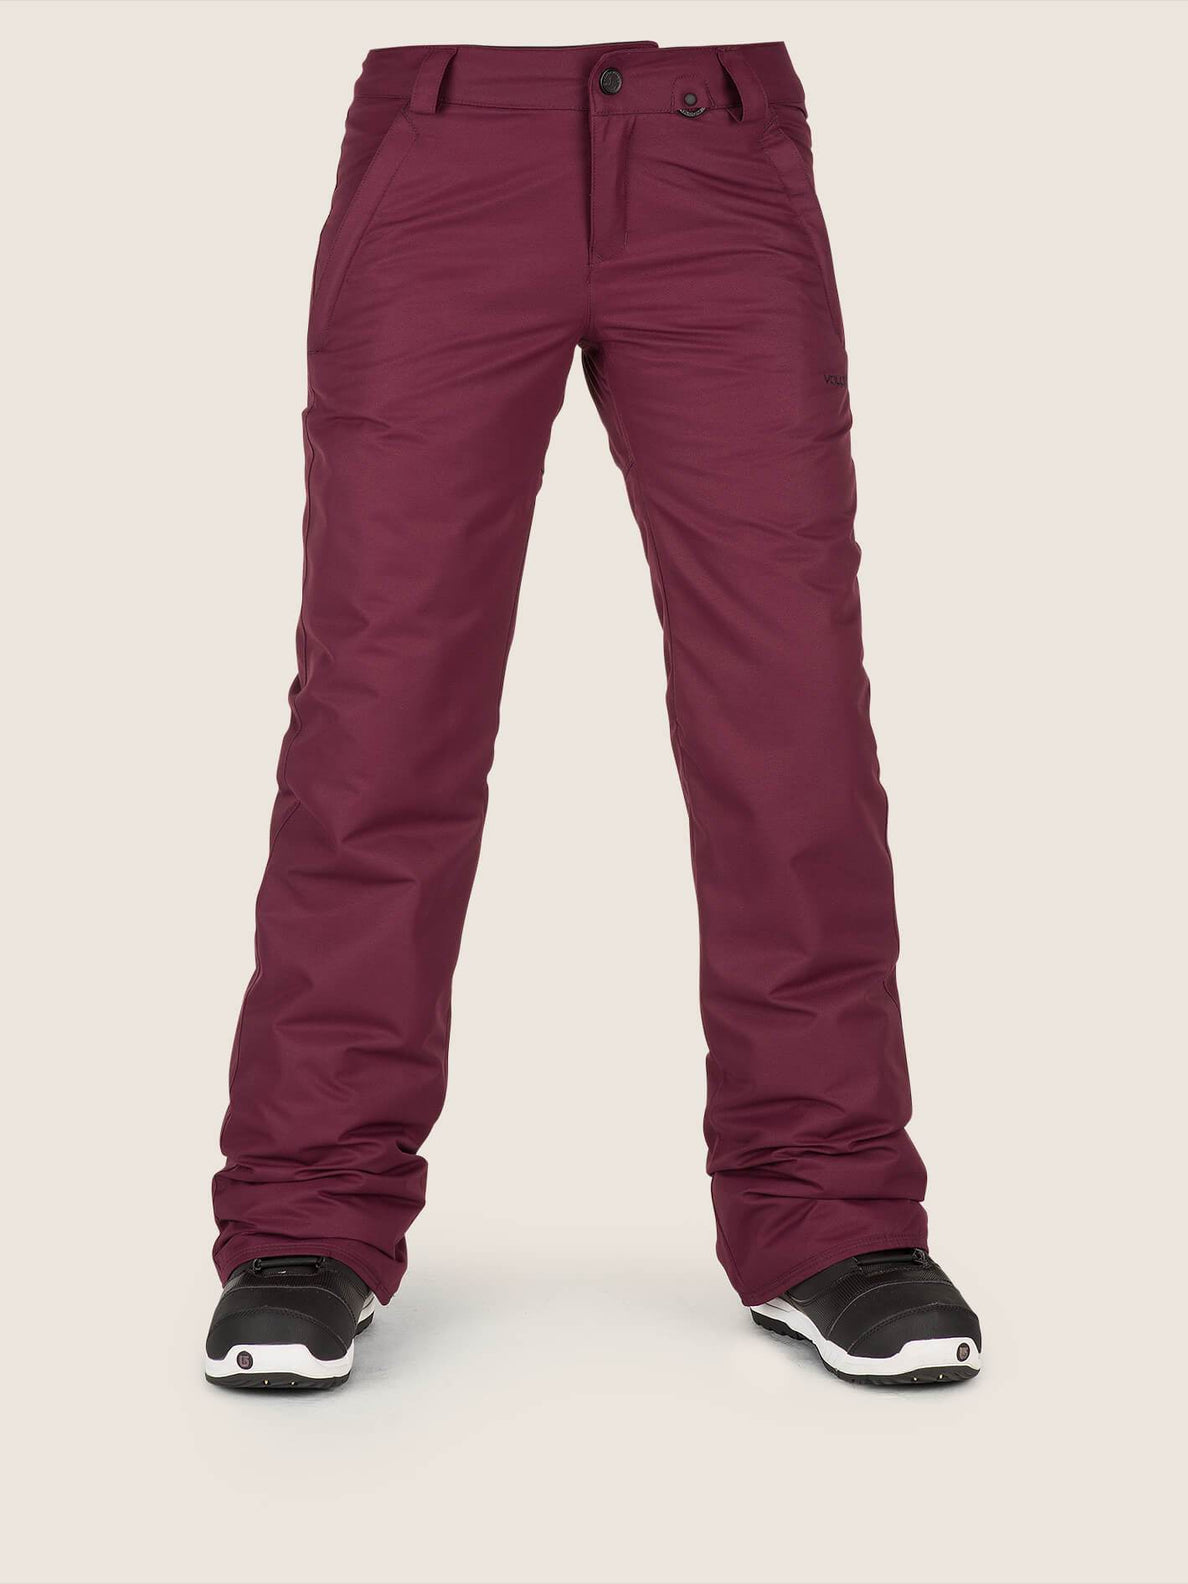 Frochickie Ins Pant Snowboardhose - MERLOT